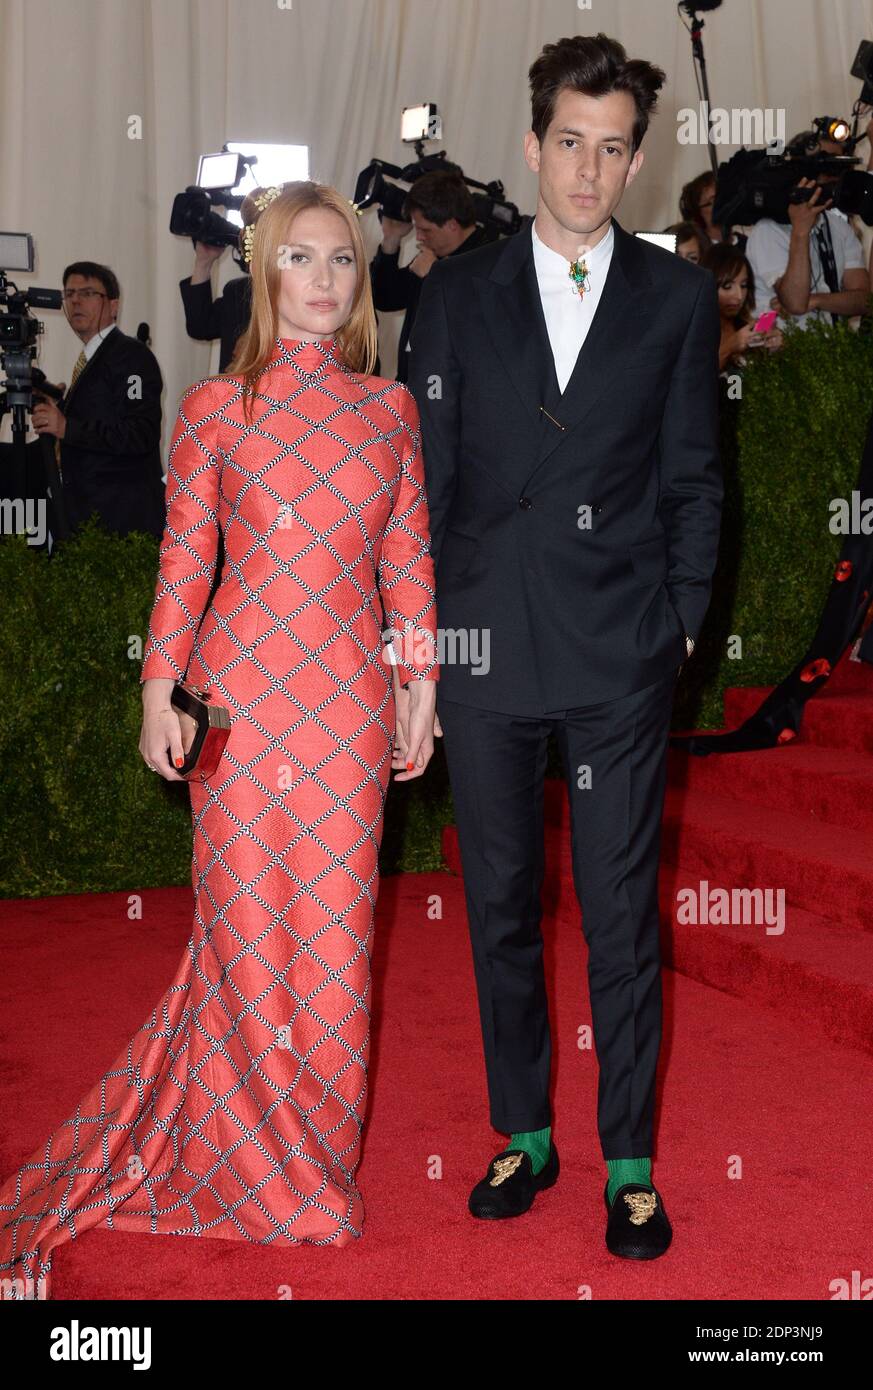 Mark Ronson and wife Josephine de La Baume attending the China: Through The Looking Glass Costume Institute Benefit Gala at Metropolitan Museum of Art on May 4, 2015 in New York City, NY, USA. Photo by Lionel Hahn/ABACAPRESS.COM Stock Photo